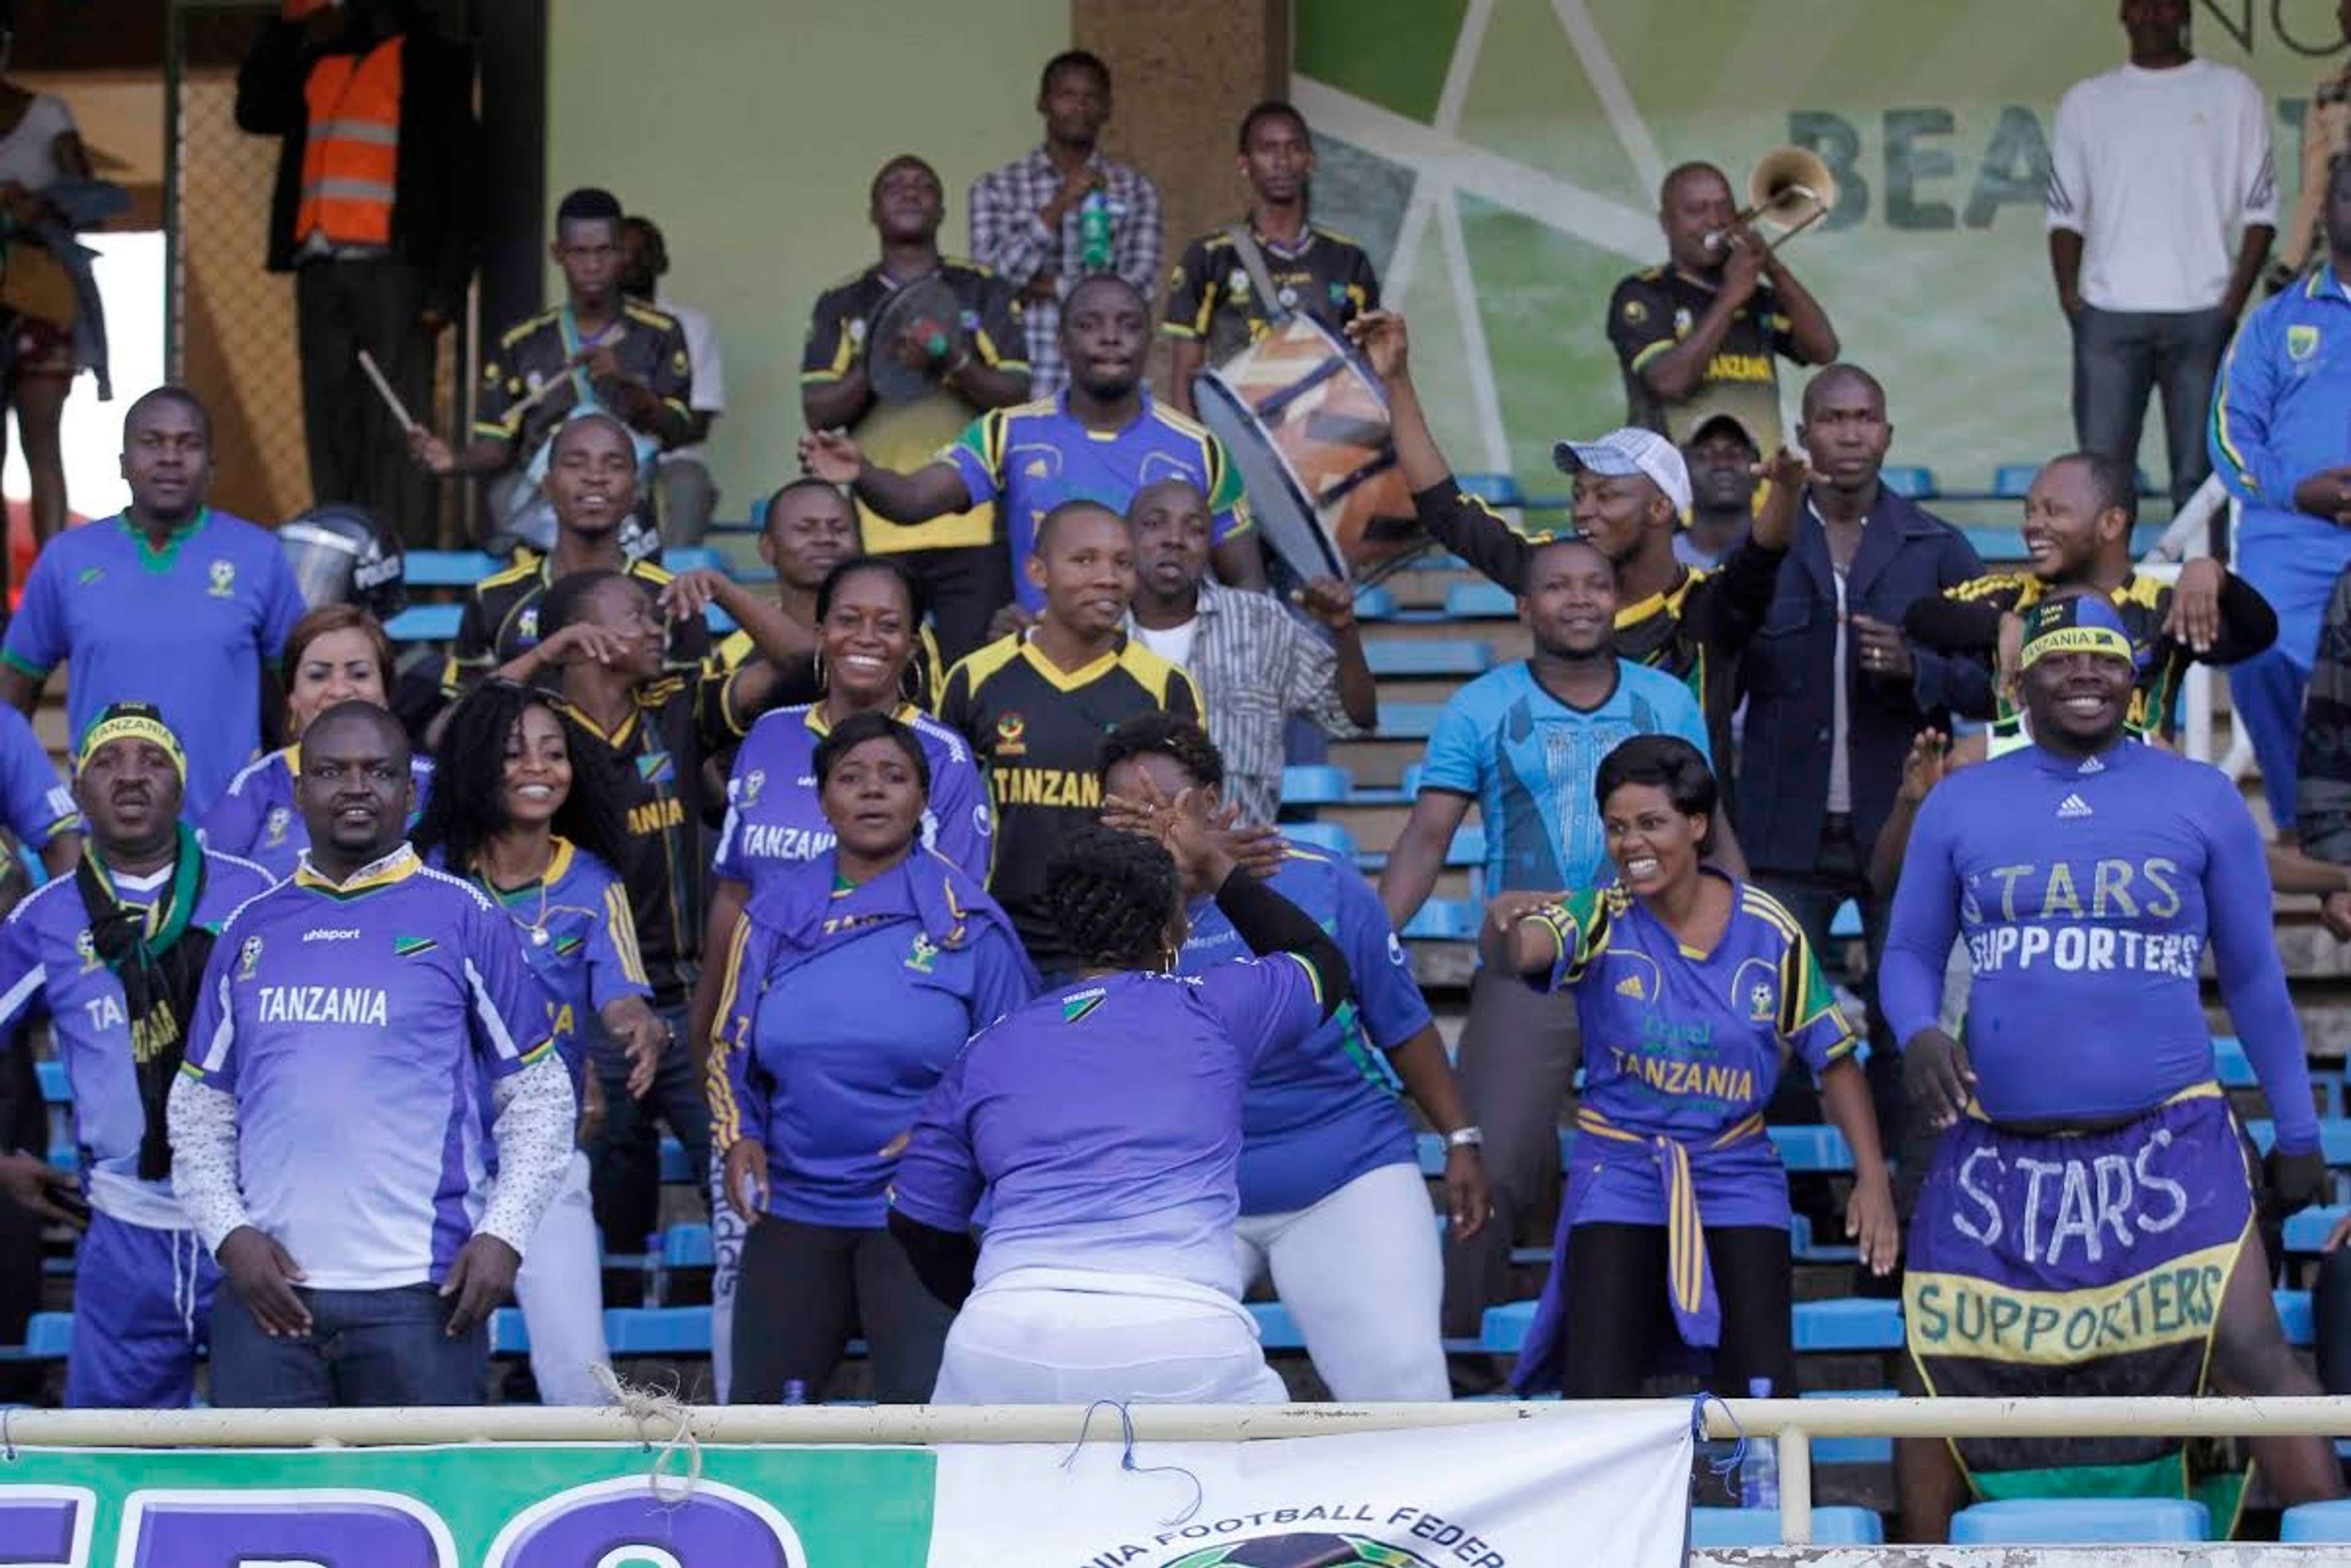 Tanzania fans rally behind their team in the friendly played at Kasarani Stadium